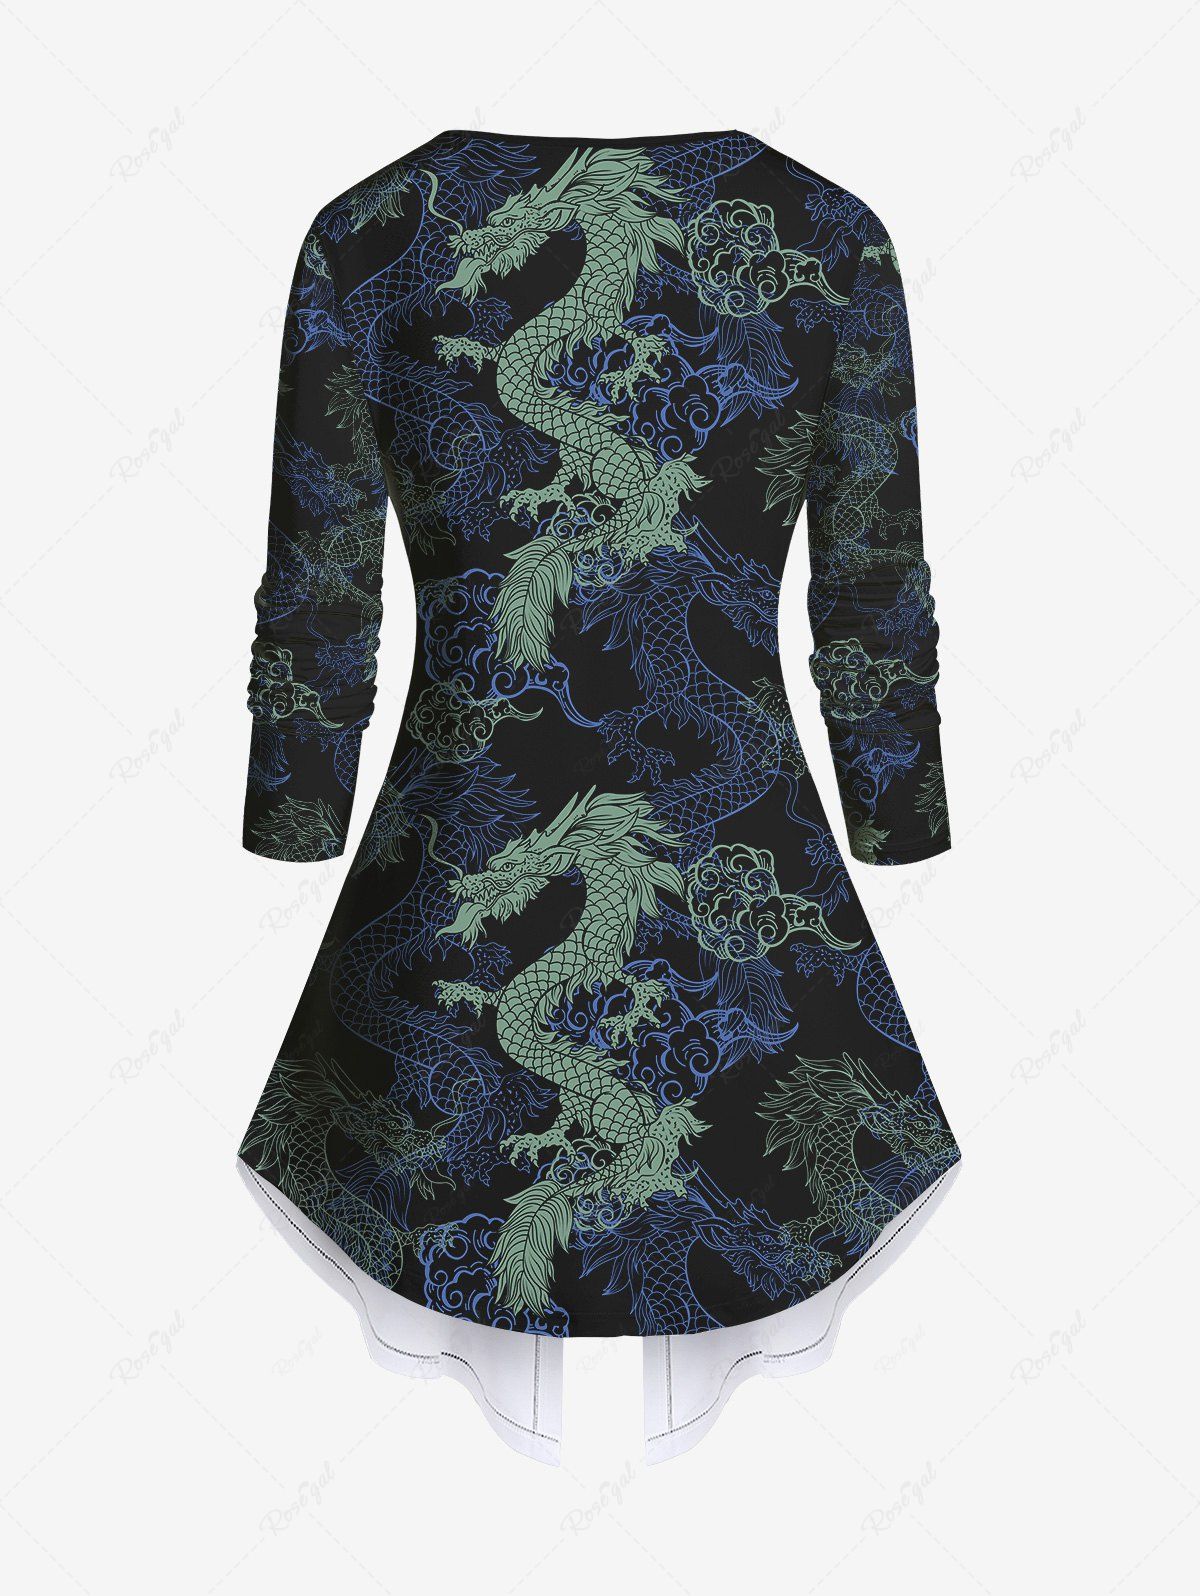 Gothic Dragon Cloud Print Patchwork Asymmetric 2 in 1 Long Sleeves Top